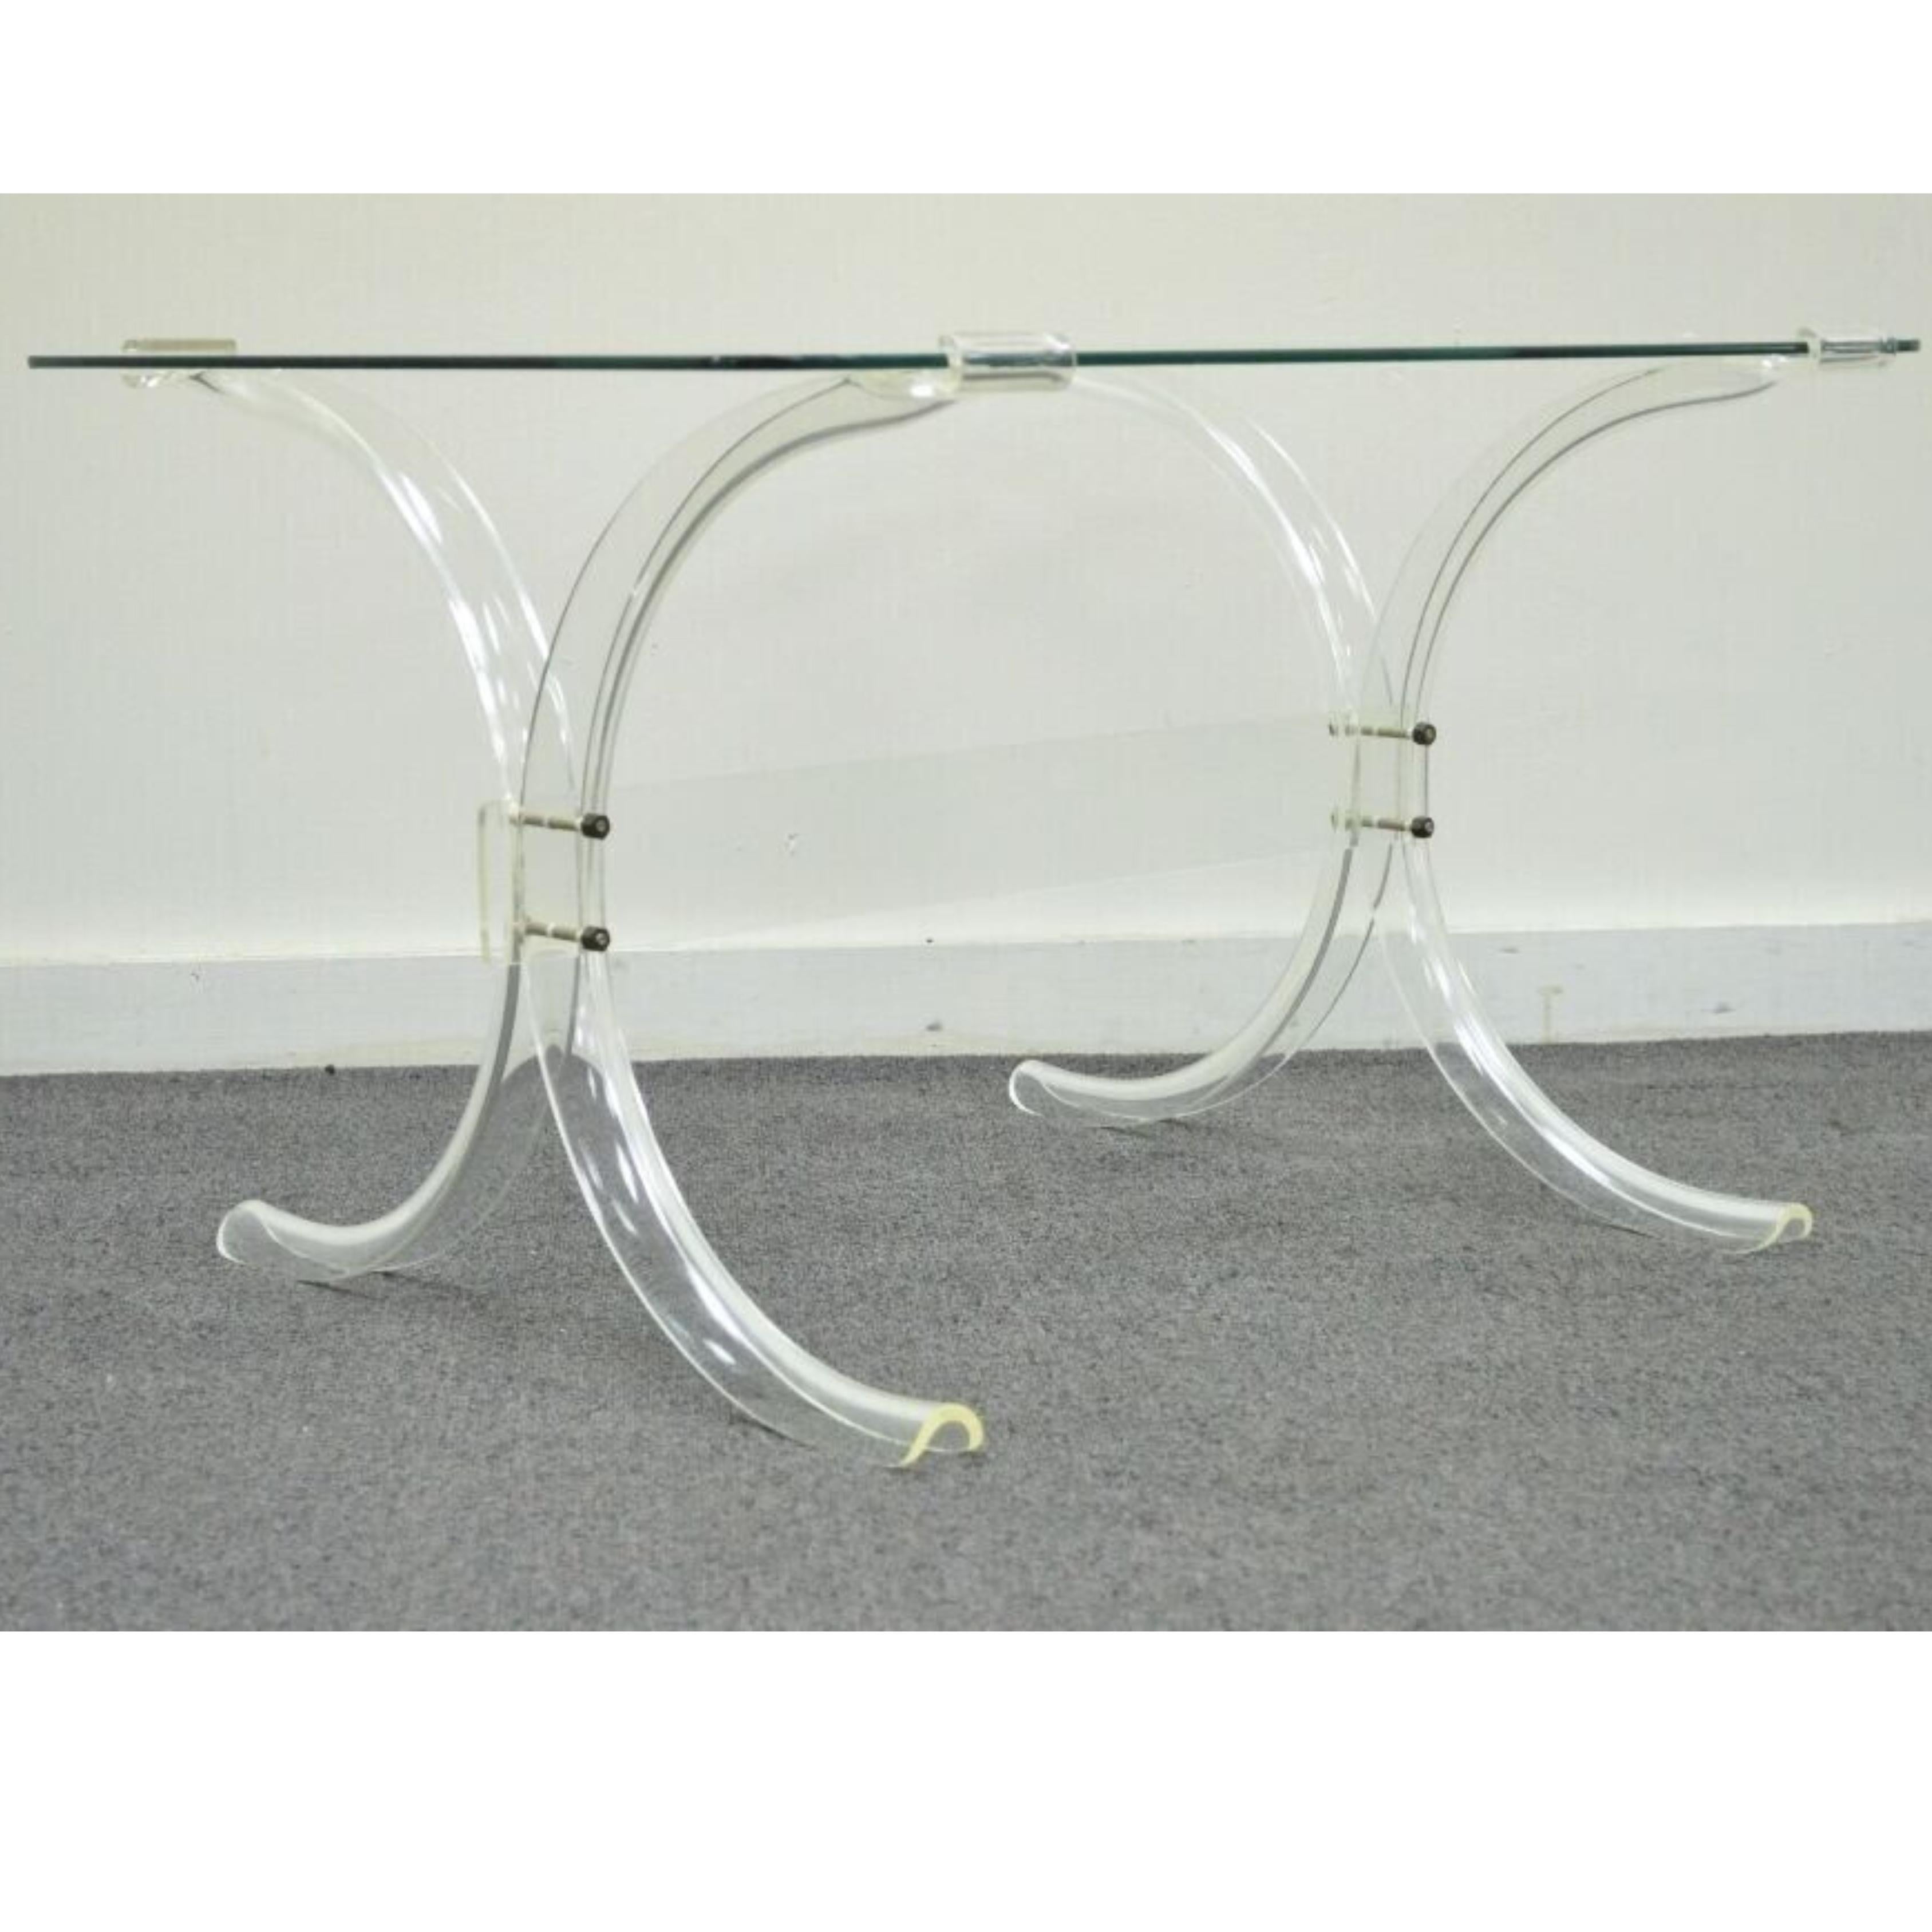 Vintage Mid Century Modern Glass Top Lucite X Form Butterfly Side End Table. Item features Modern x-form stretcher base, rounded edge glass top, very nice vintage item. Circa Mid to Late 20th Century. Measurements: 18.25